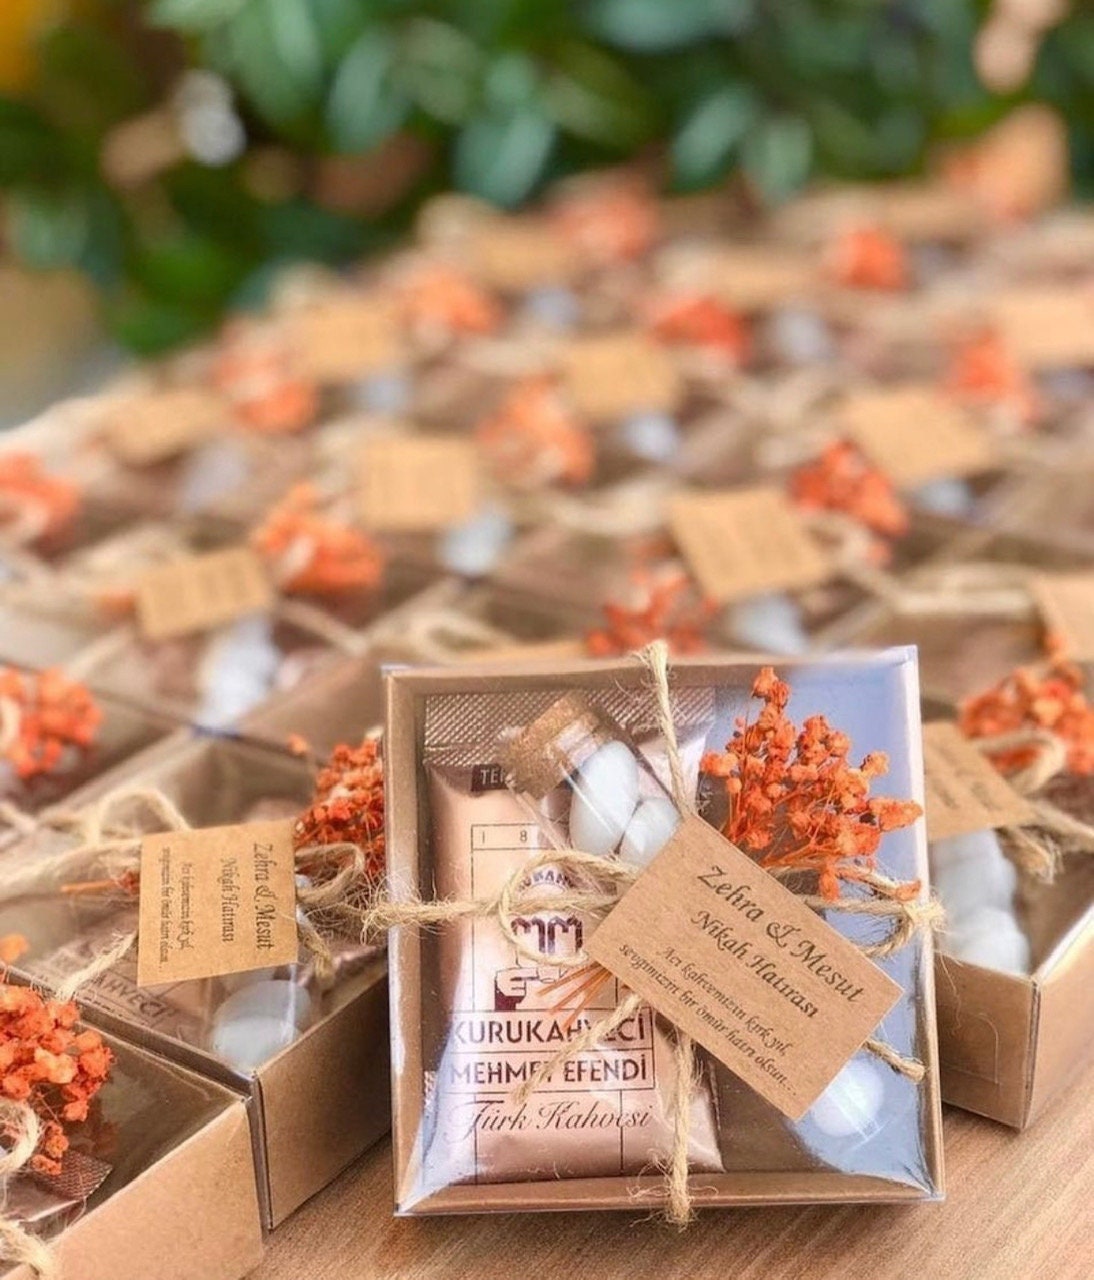 Budget wedding favors ideas: how to have unique wedding favors on